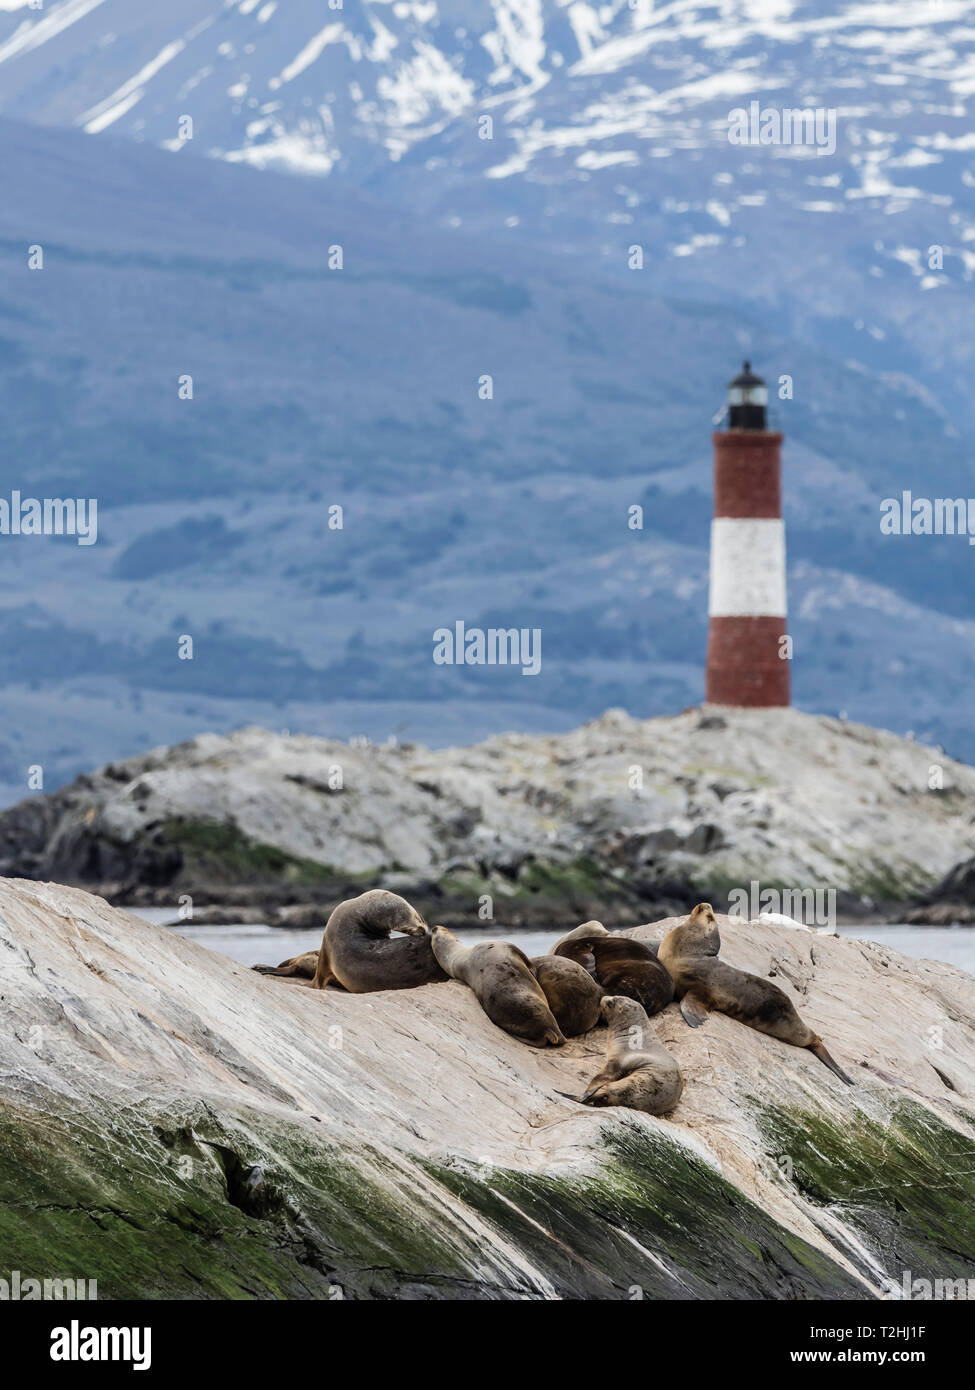 South American sea lions, Otaria flavescens, on a small islet in the Beagle Channel, Ushuaia, Argentina, South America Stock Photo